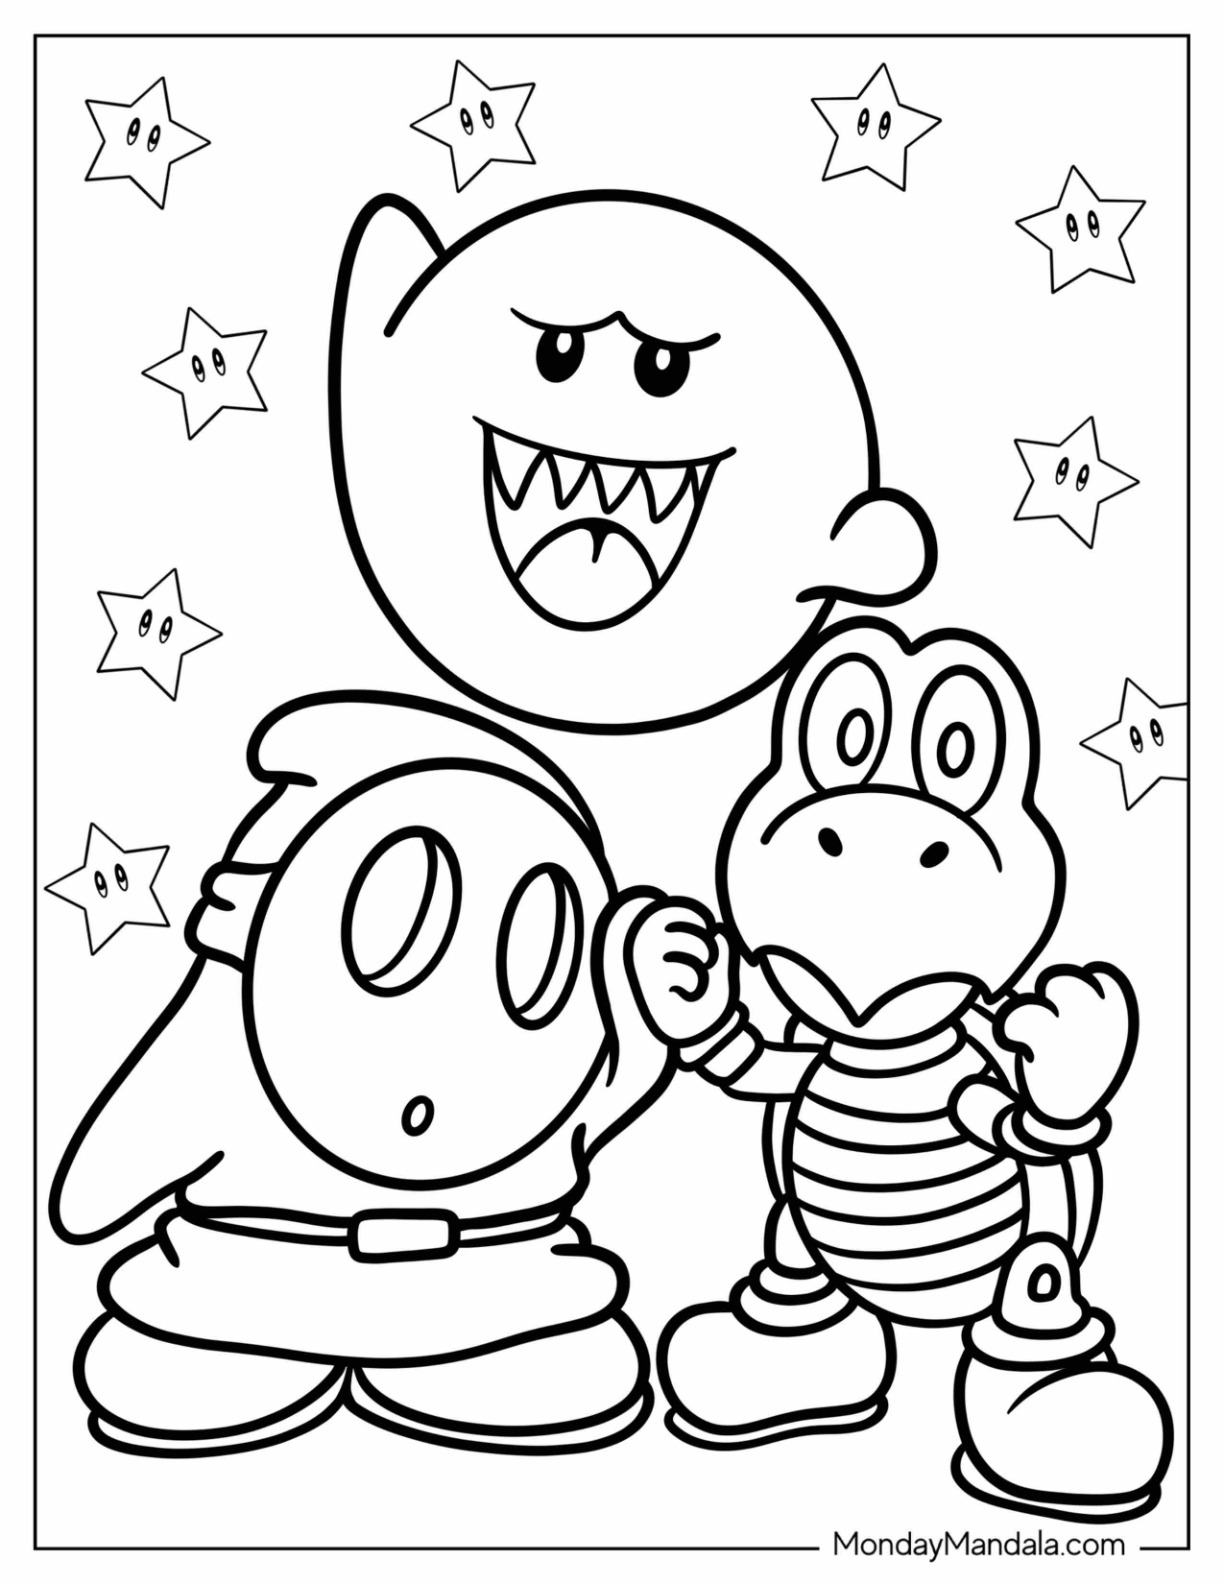 Shy guy coloring pages free pdf printables